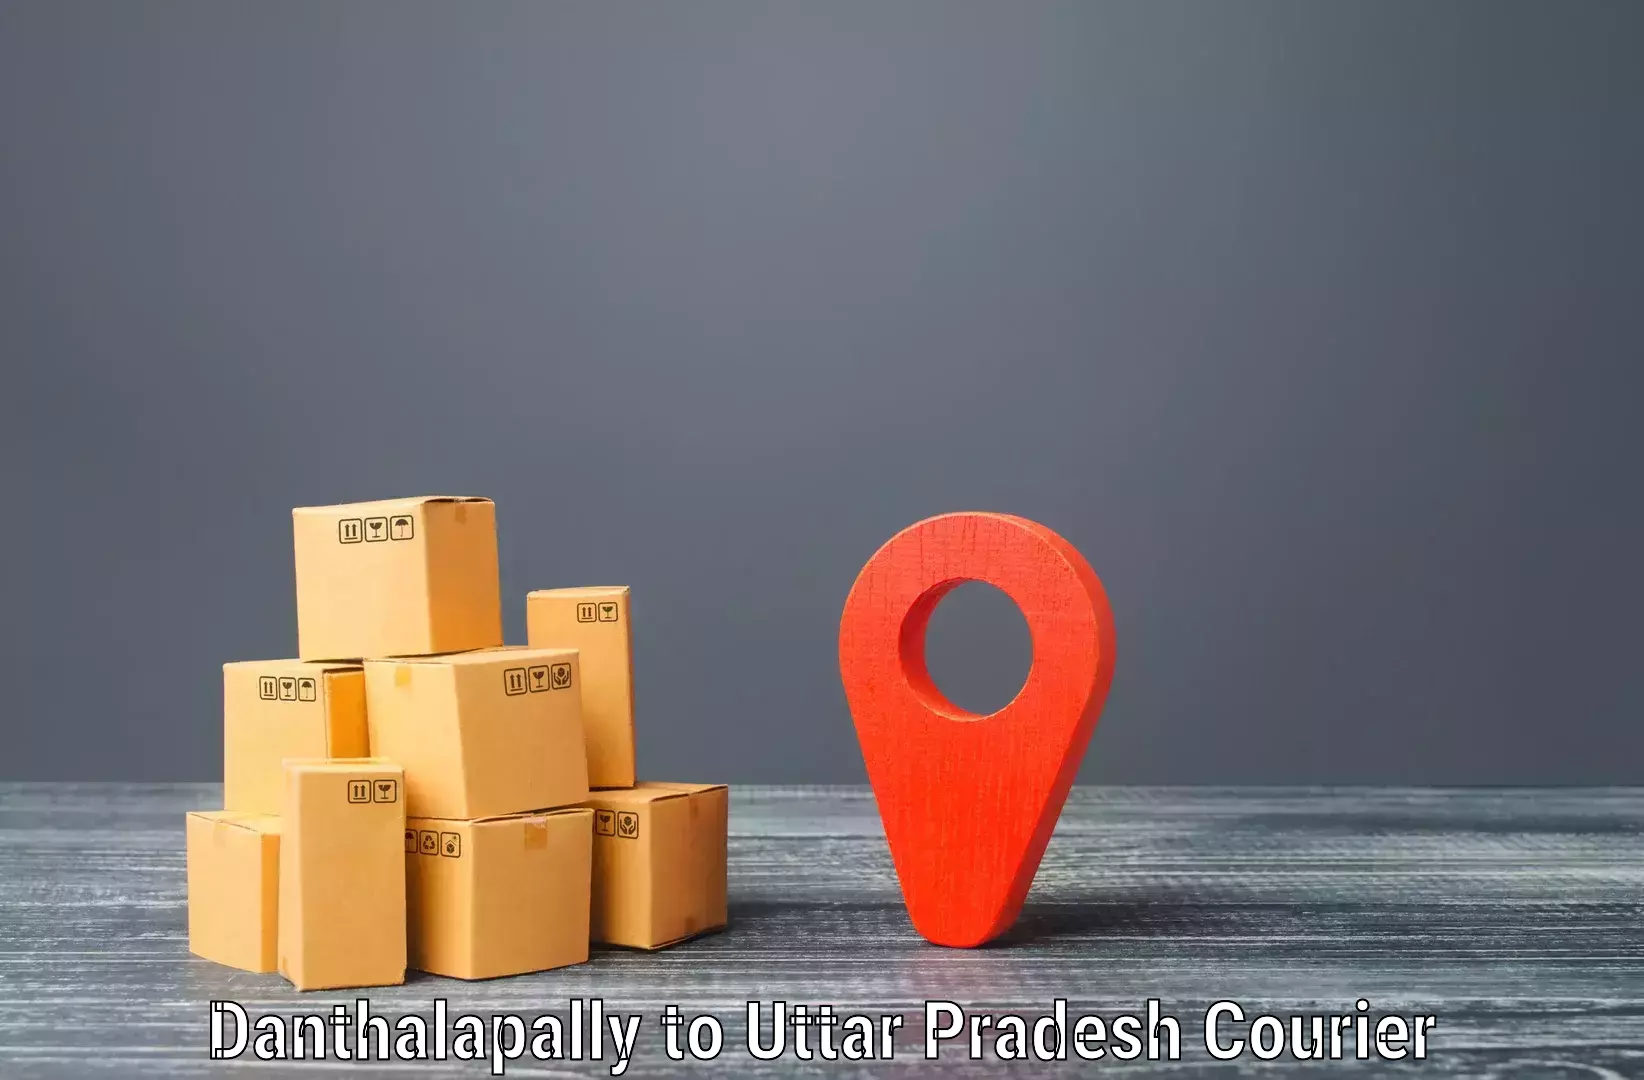 Package delivery network Danthalapally to Rudauli